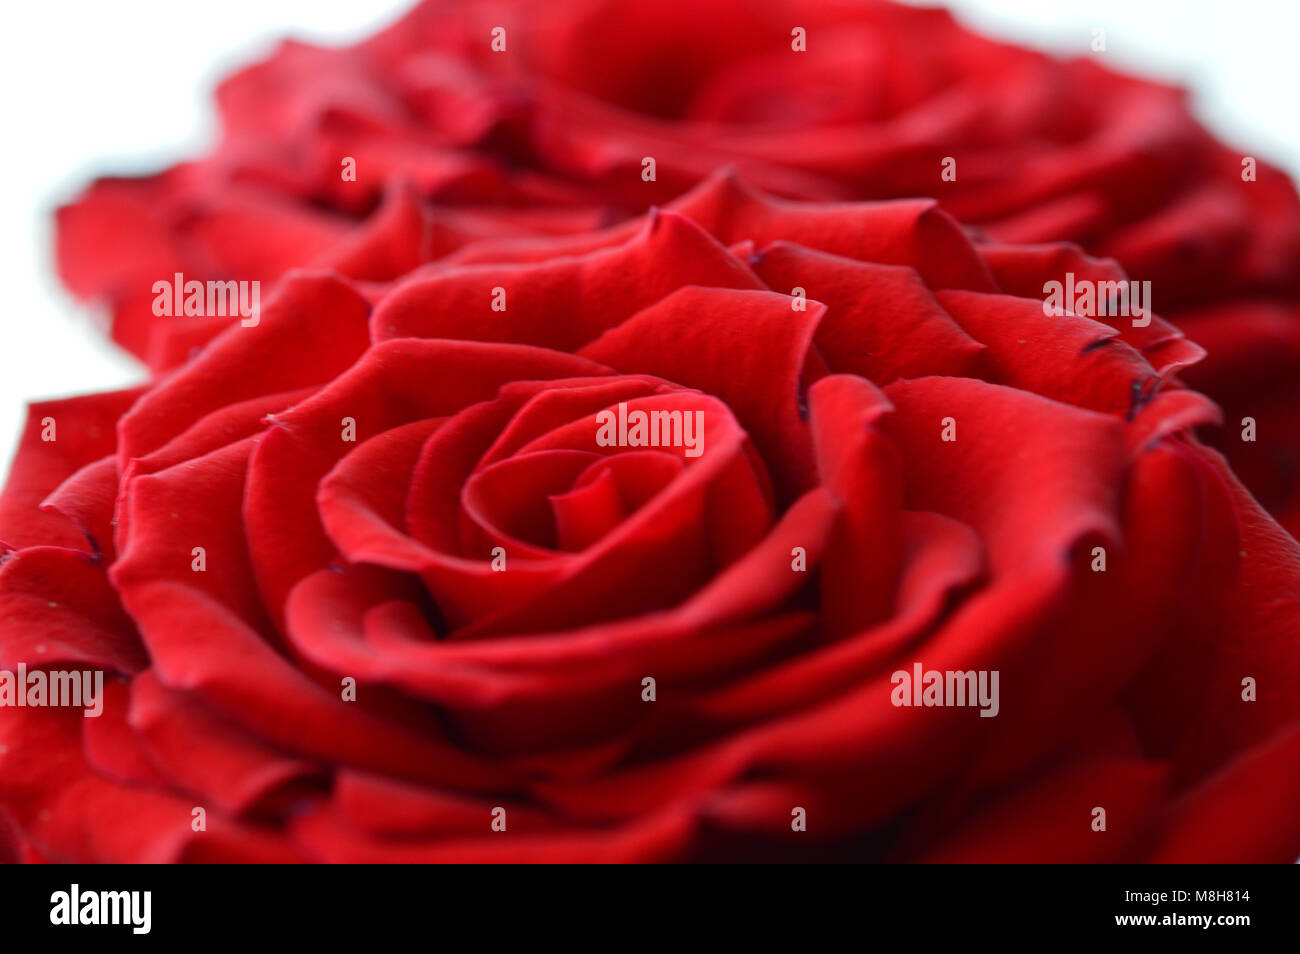 Red rose close up Stock Photo